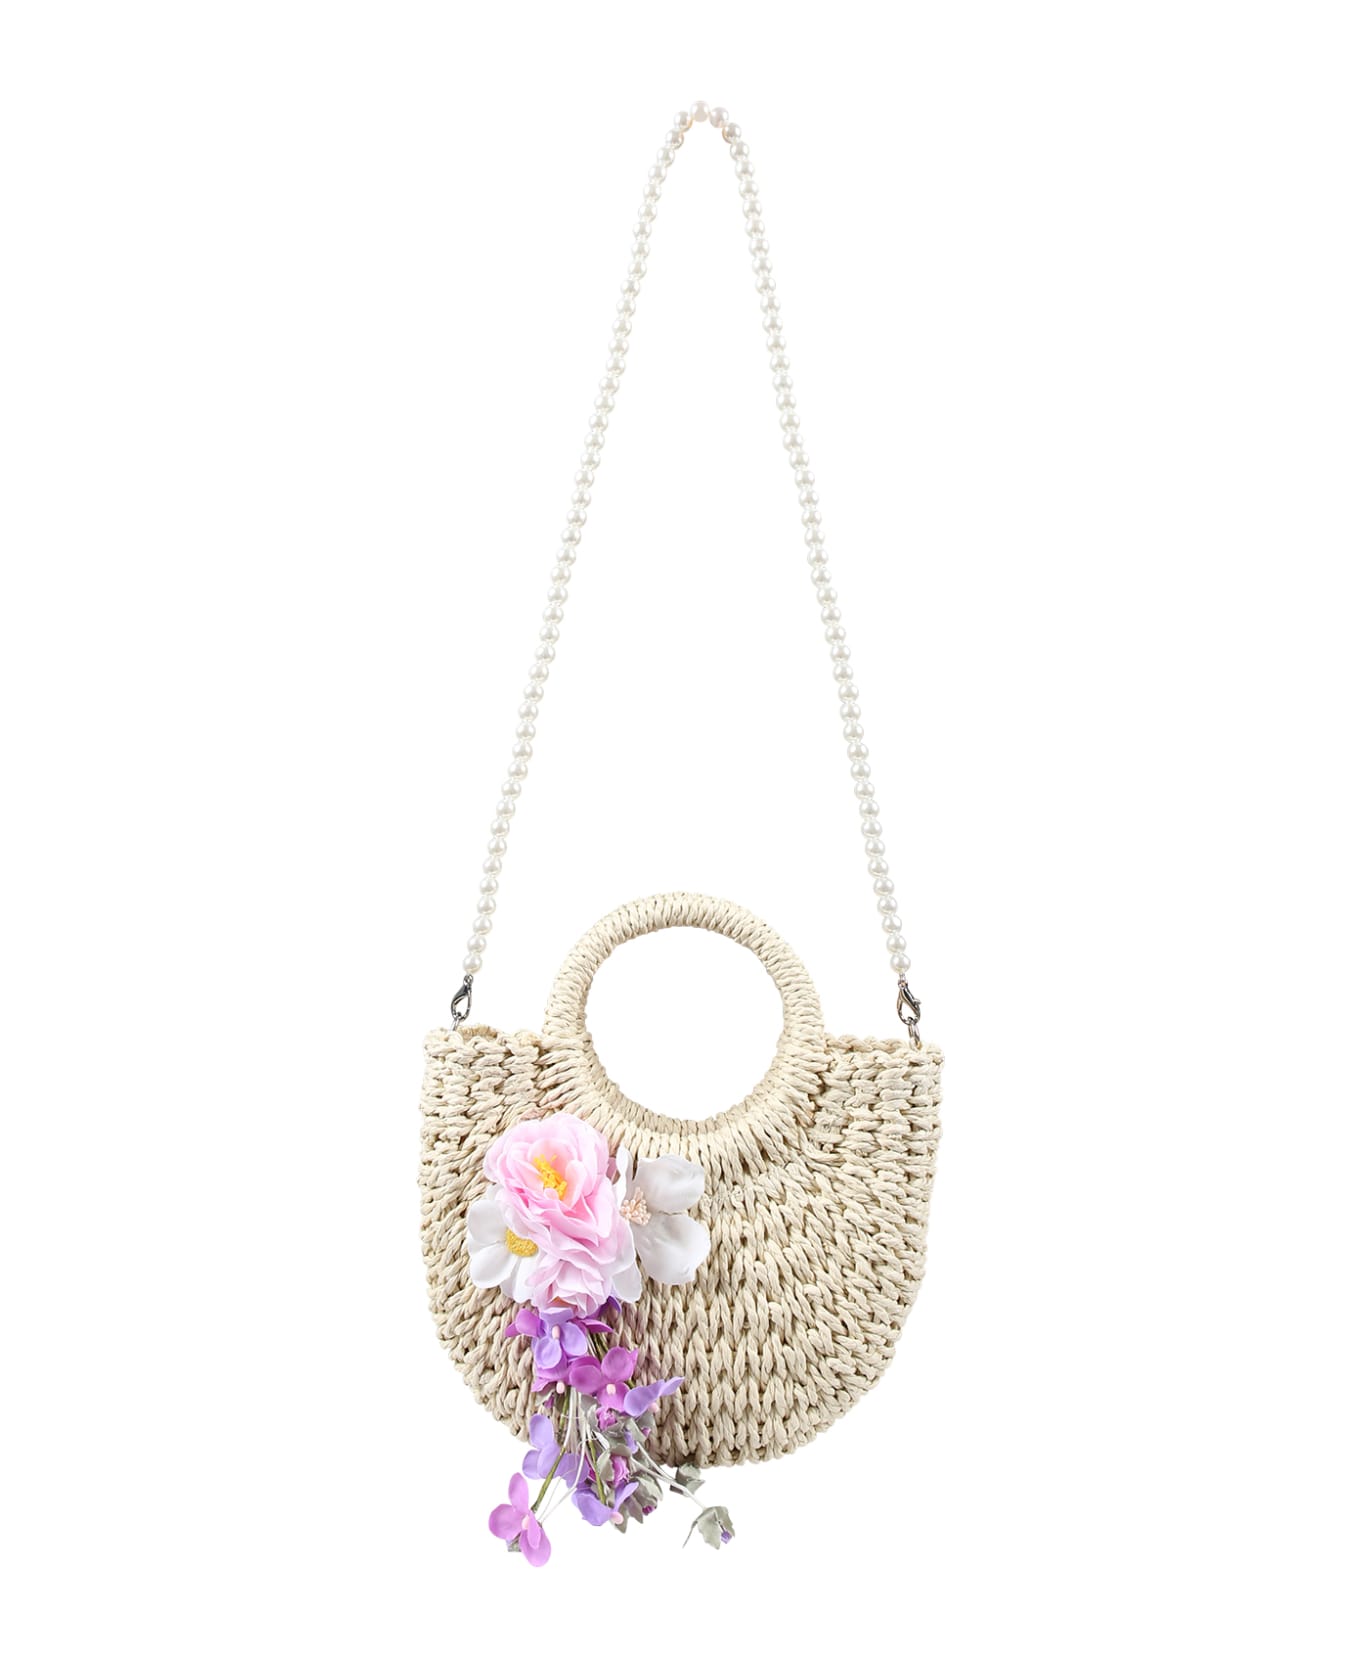 Monnalisa Beige Bag For Girl With Bouquet - Beige